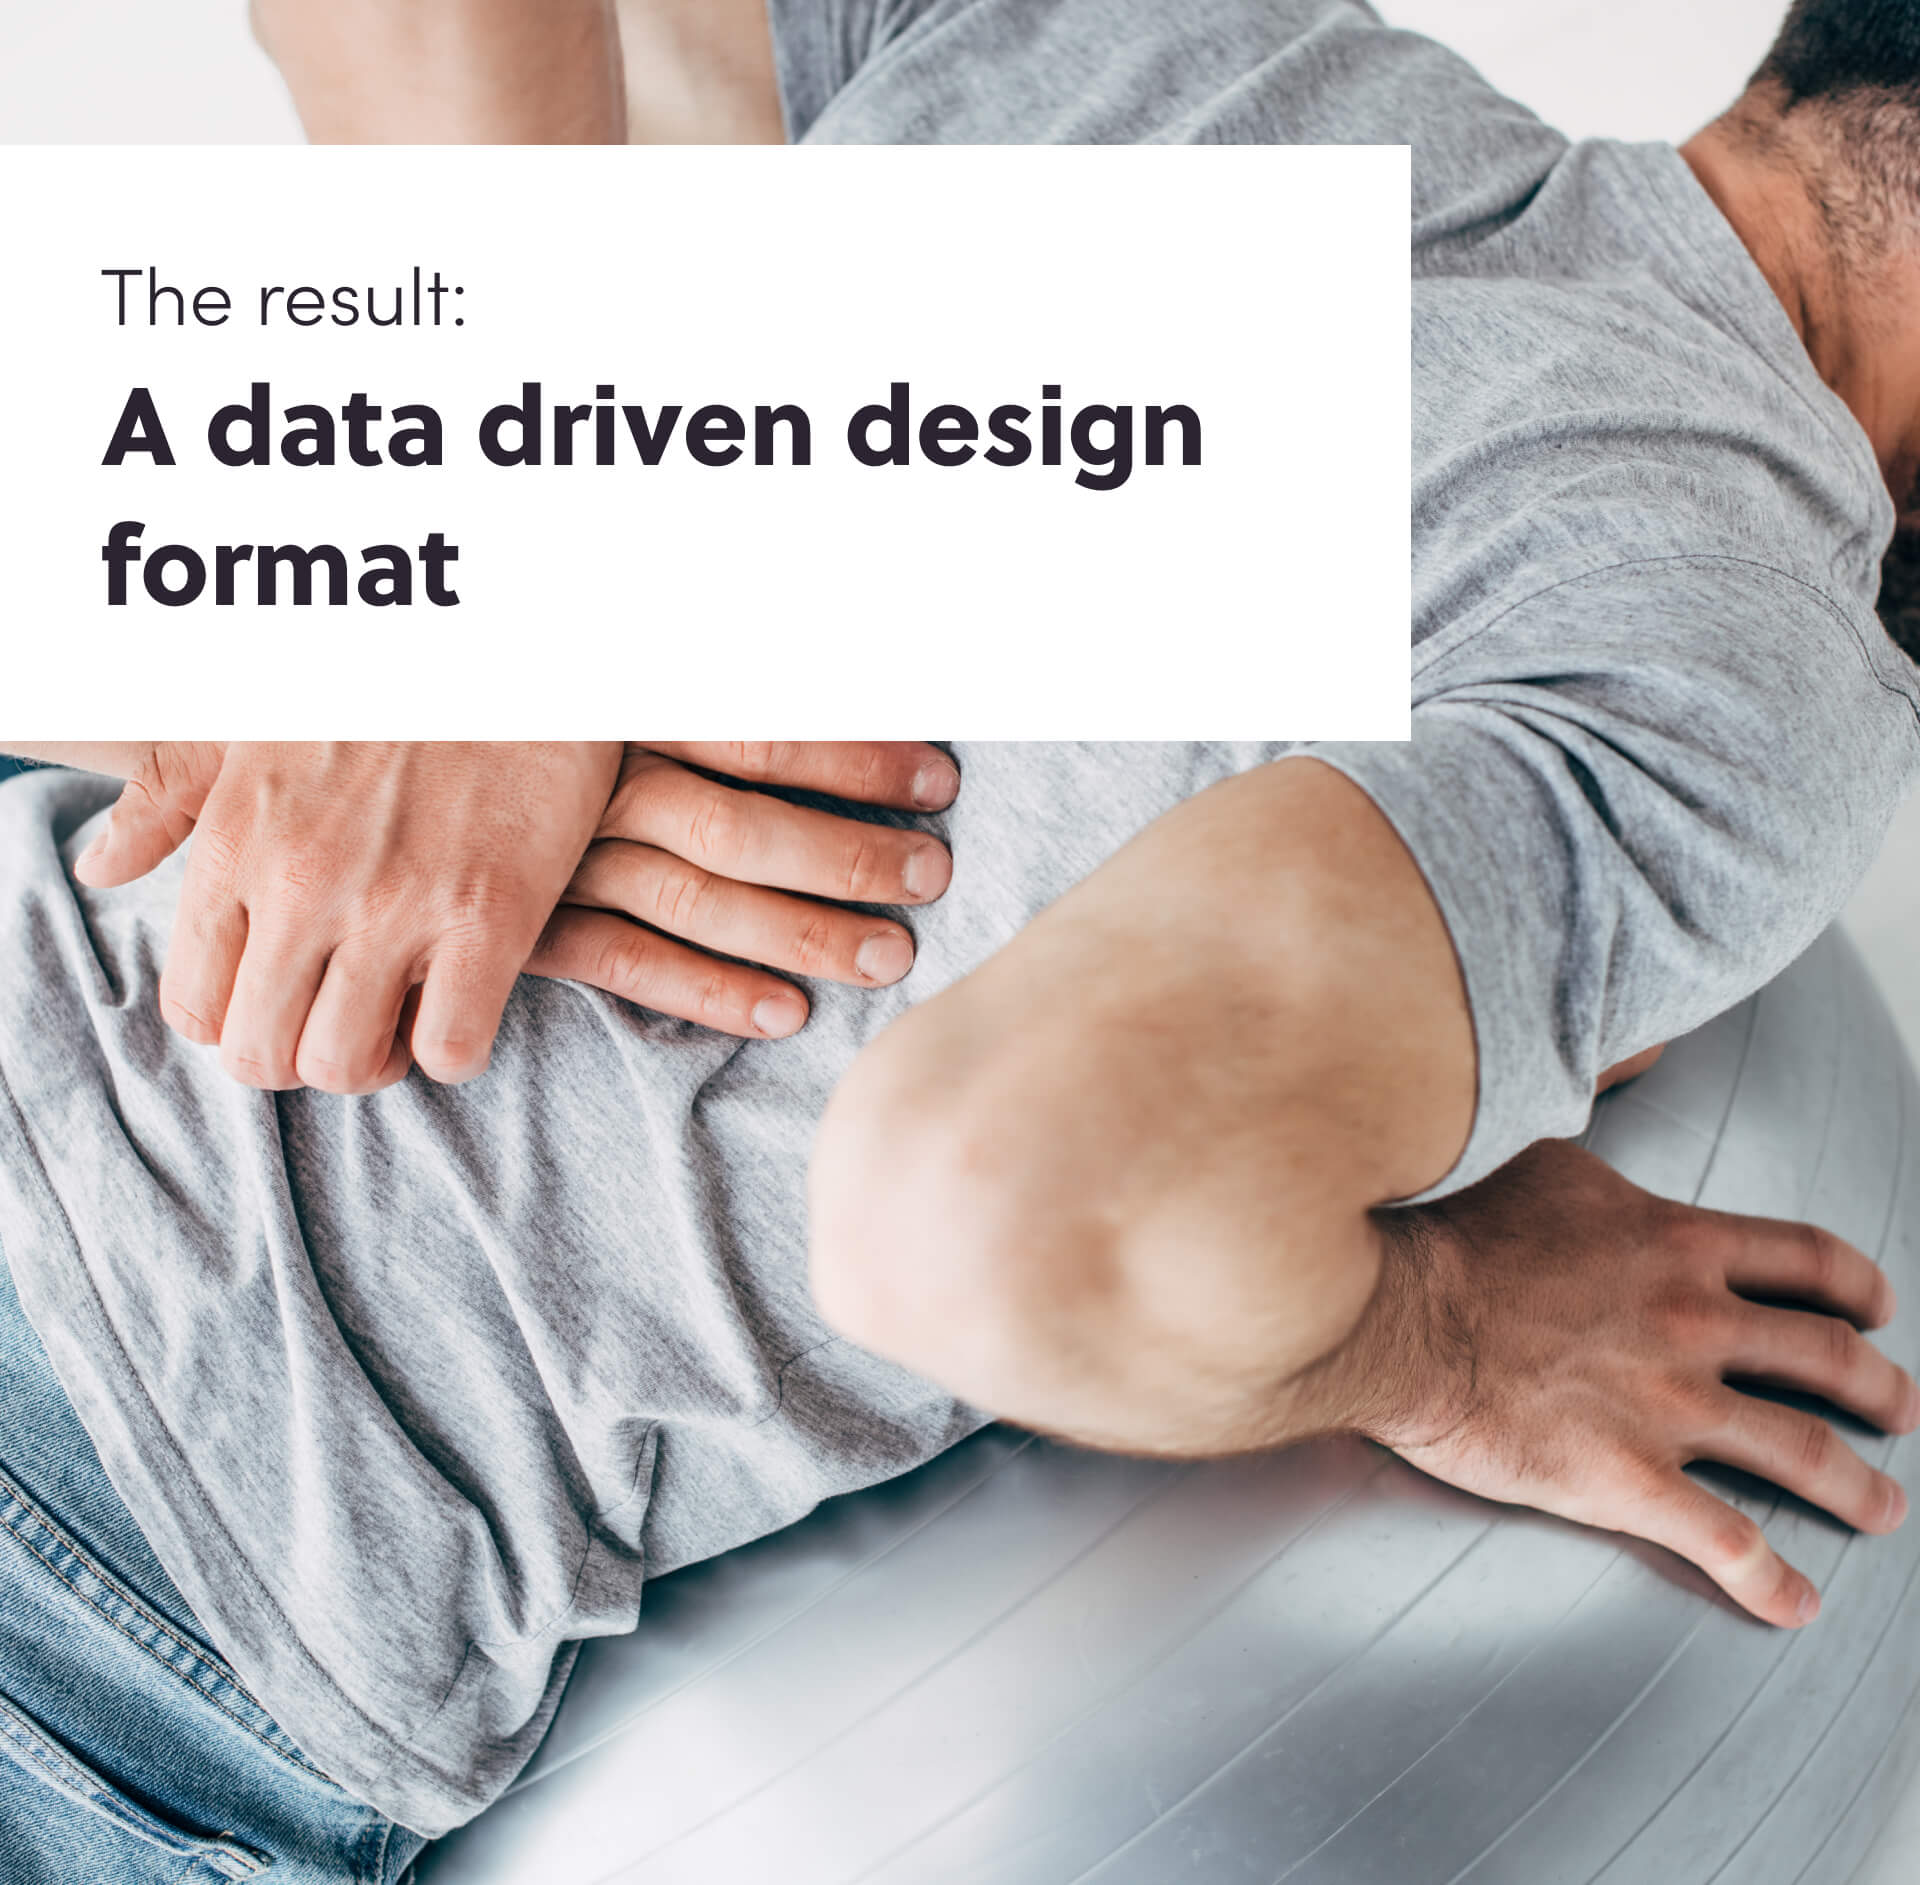 Man leaning over with text overlay stating "The result: A data driven design format"